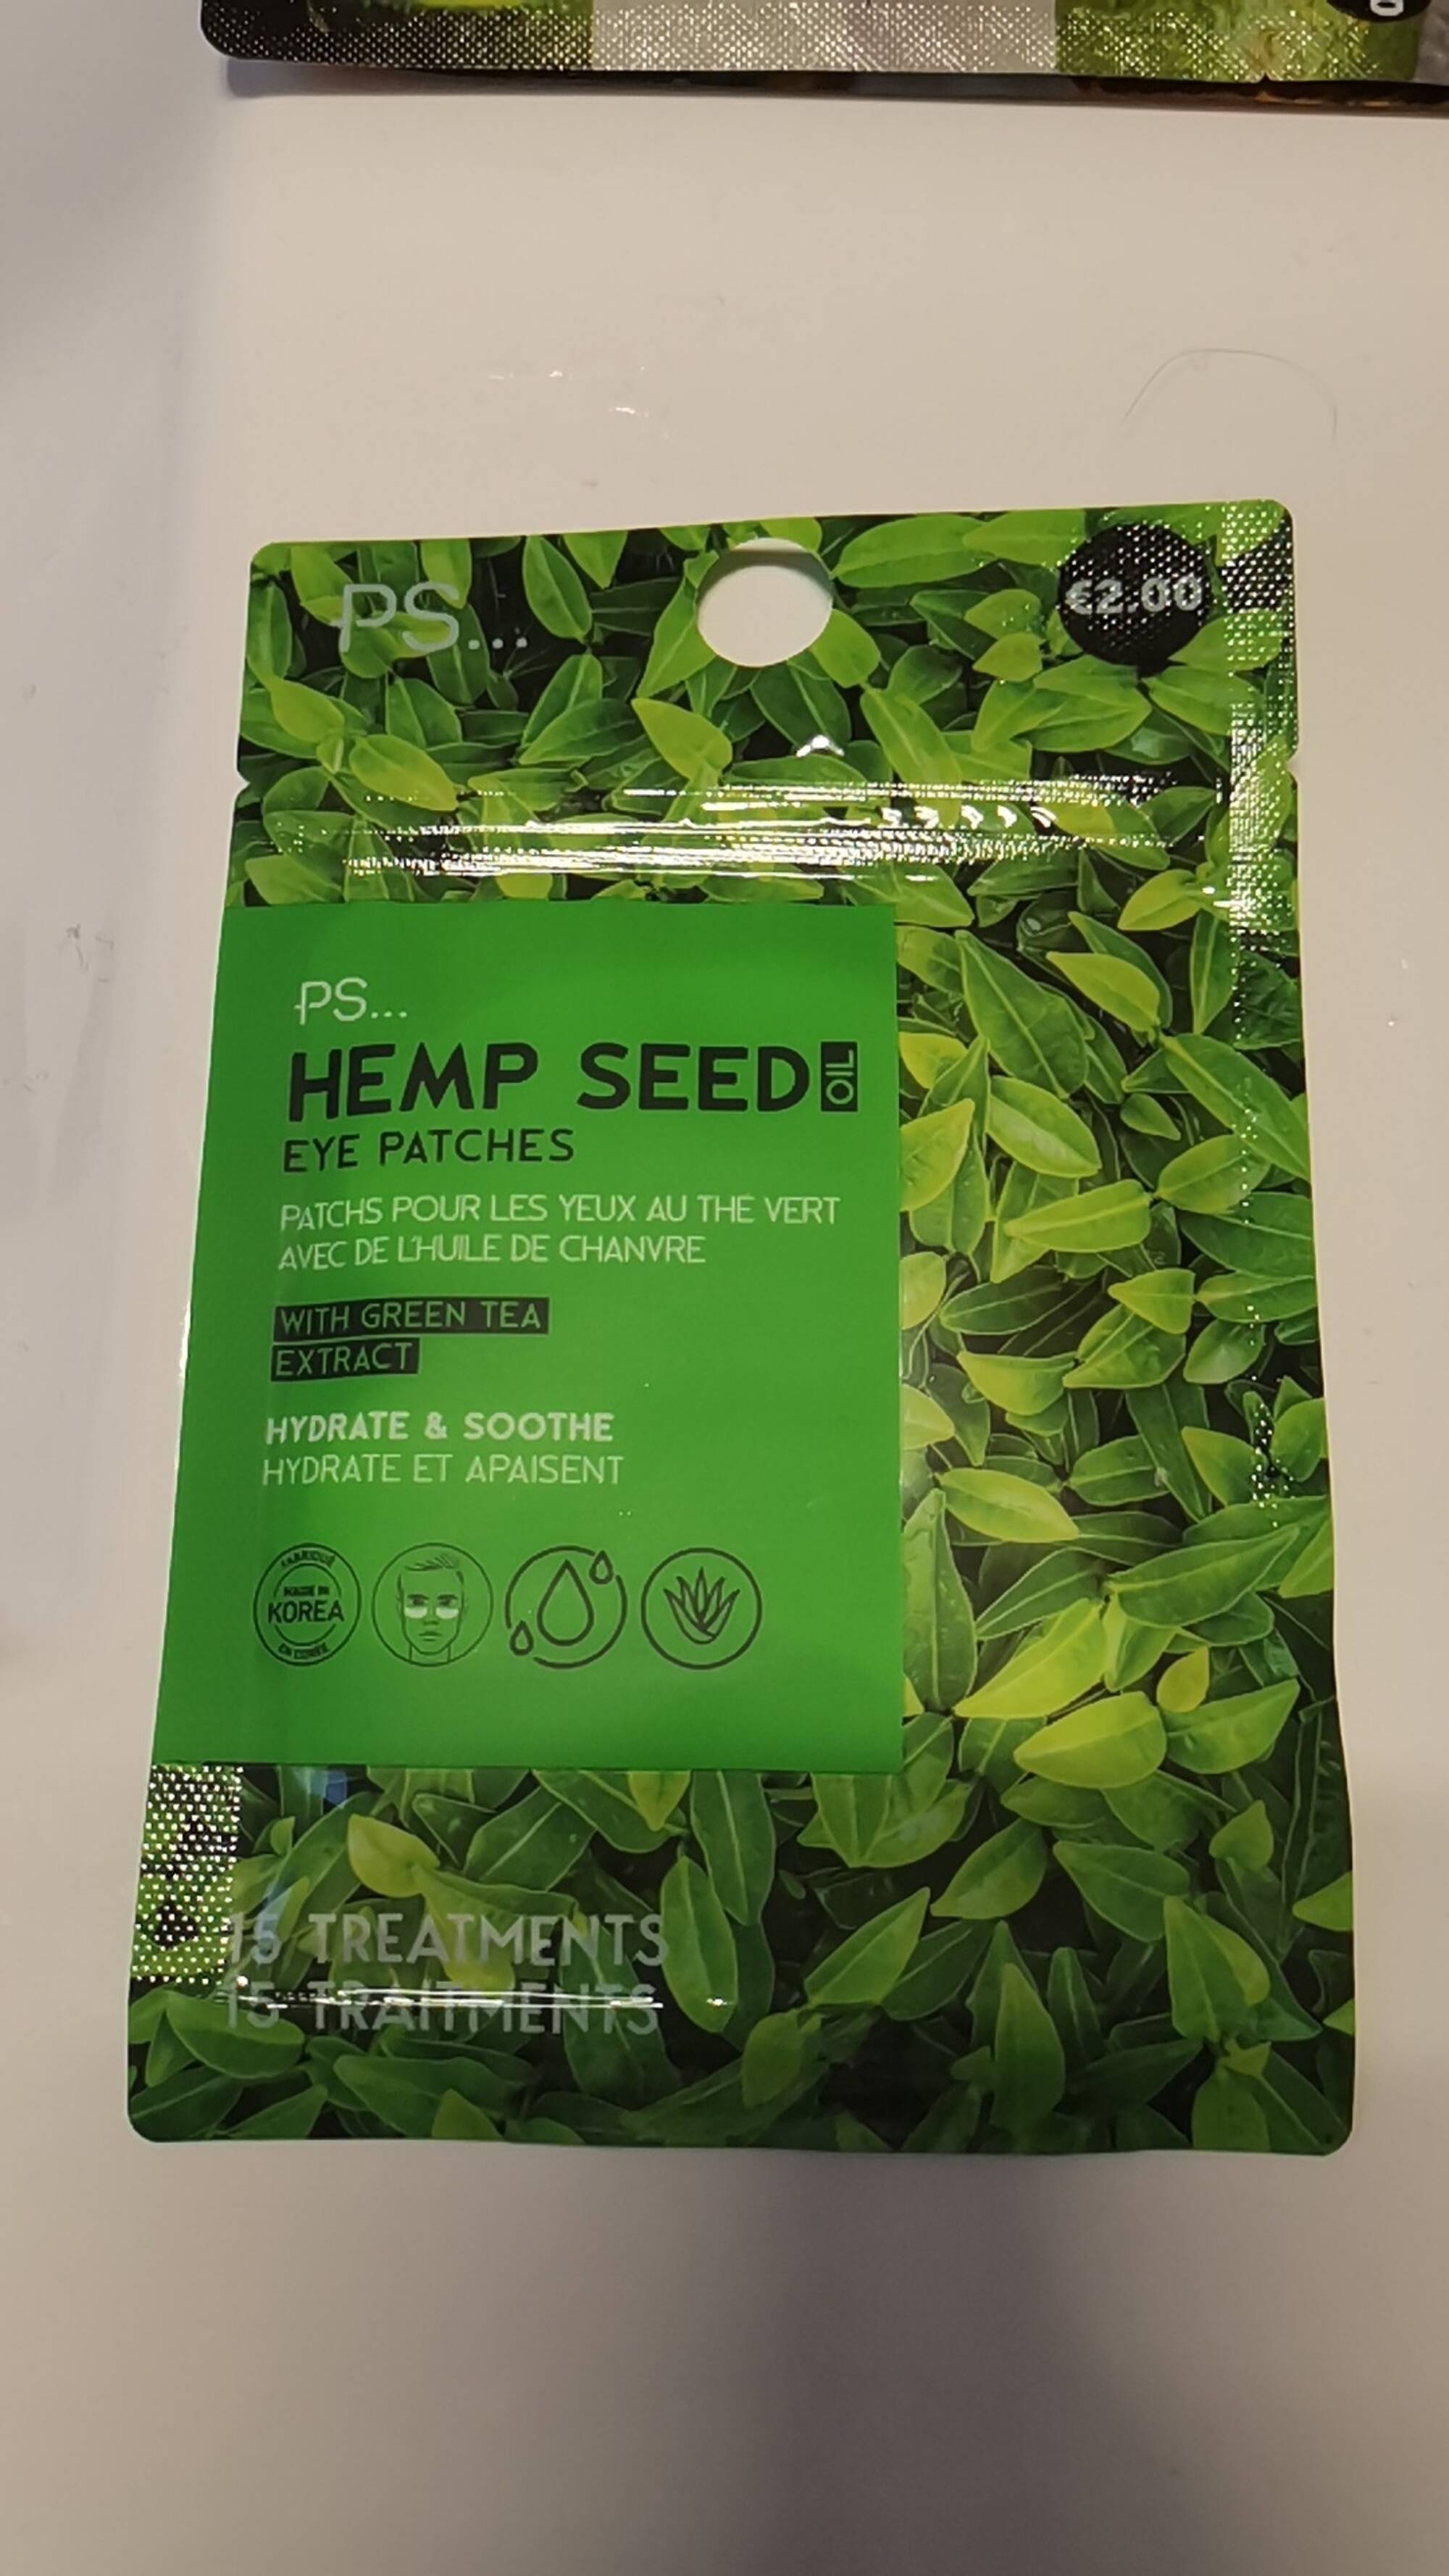 PRIMARK PS... - Hemp seed oil - Eye patches